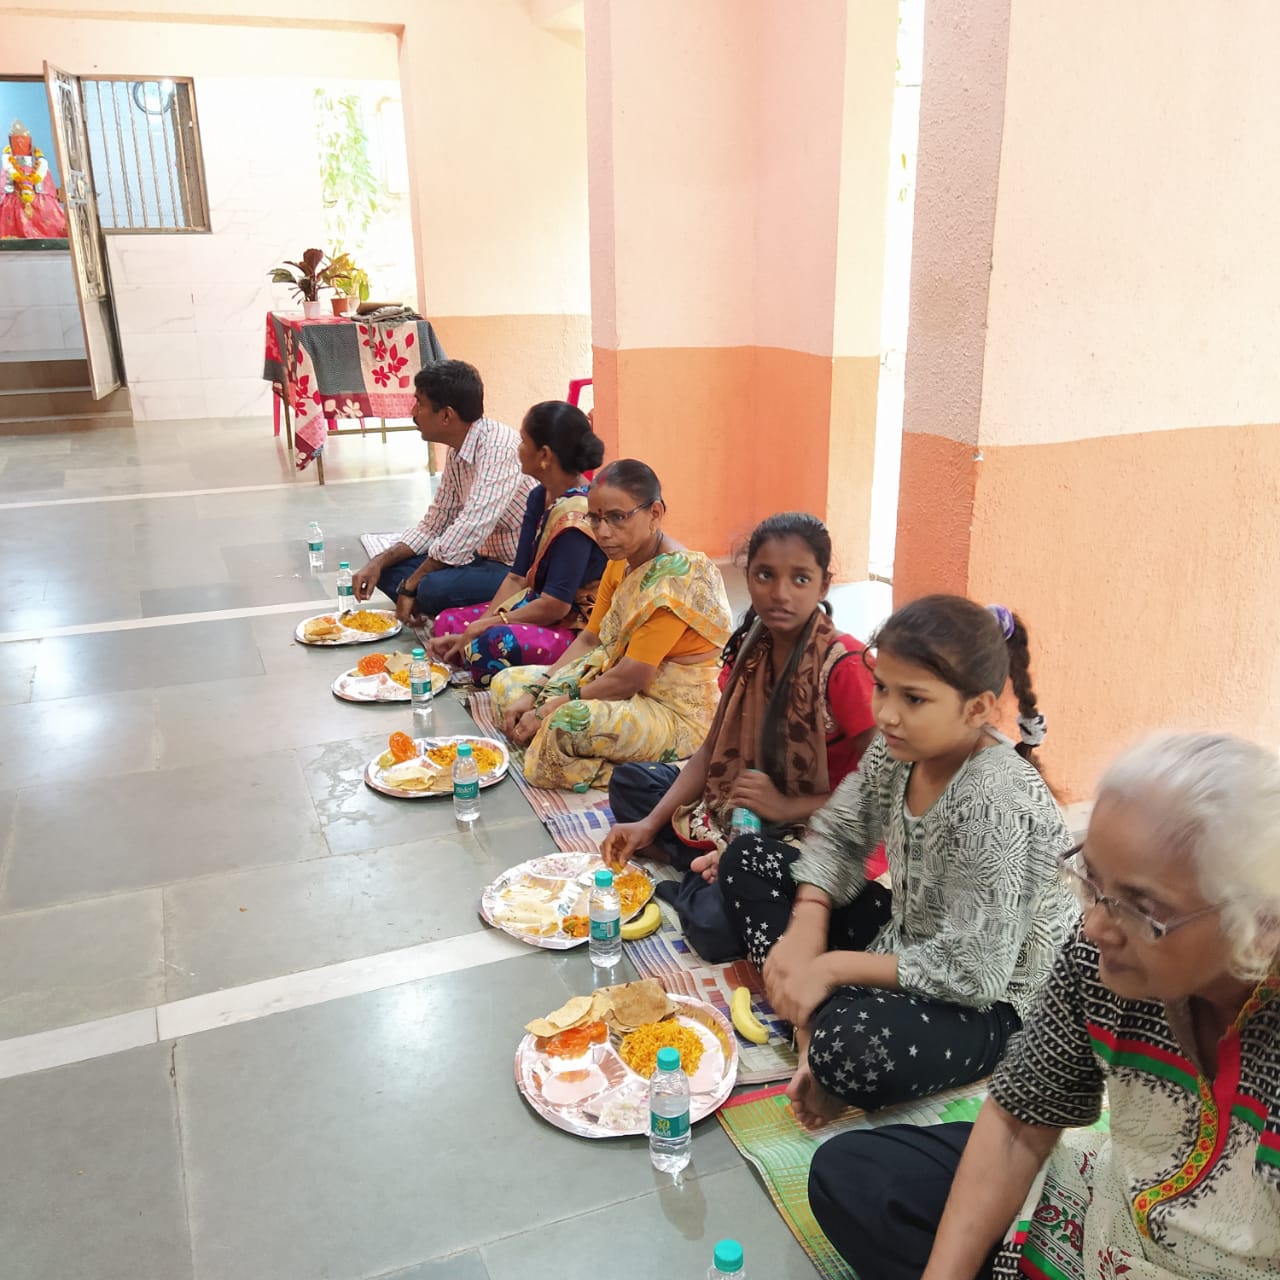 World Day of the Poor 2019 at the 16 Small Christian Communities in Holy Family Parish, Andheri East